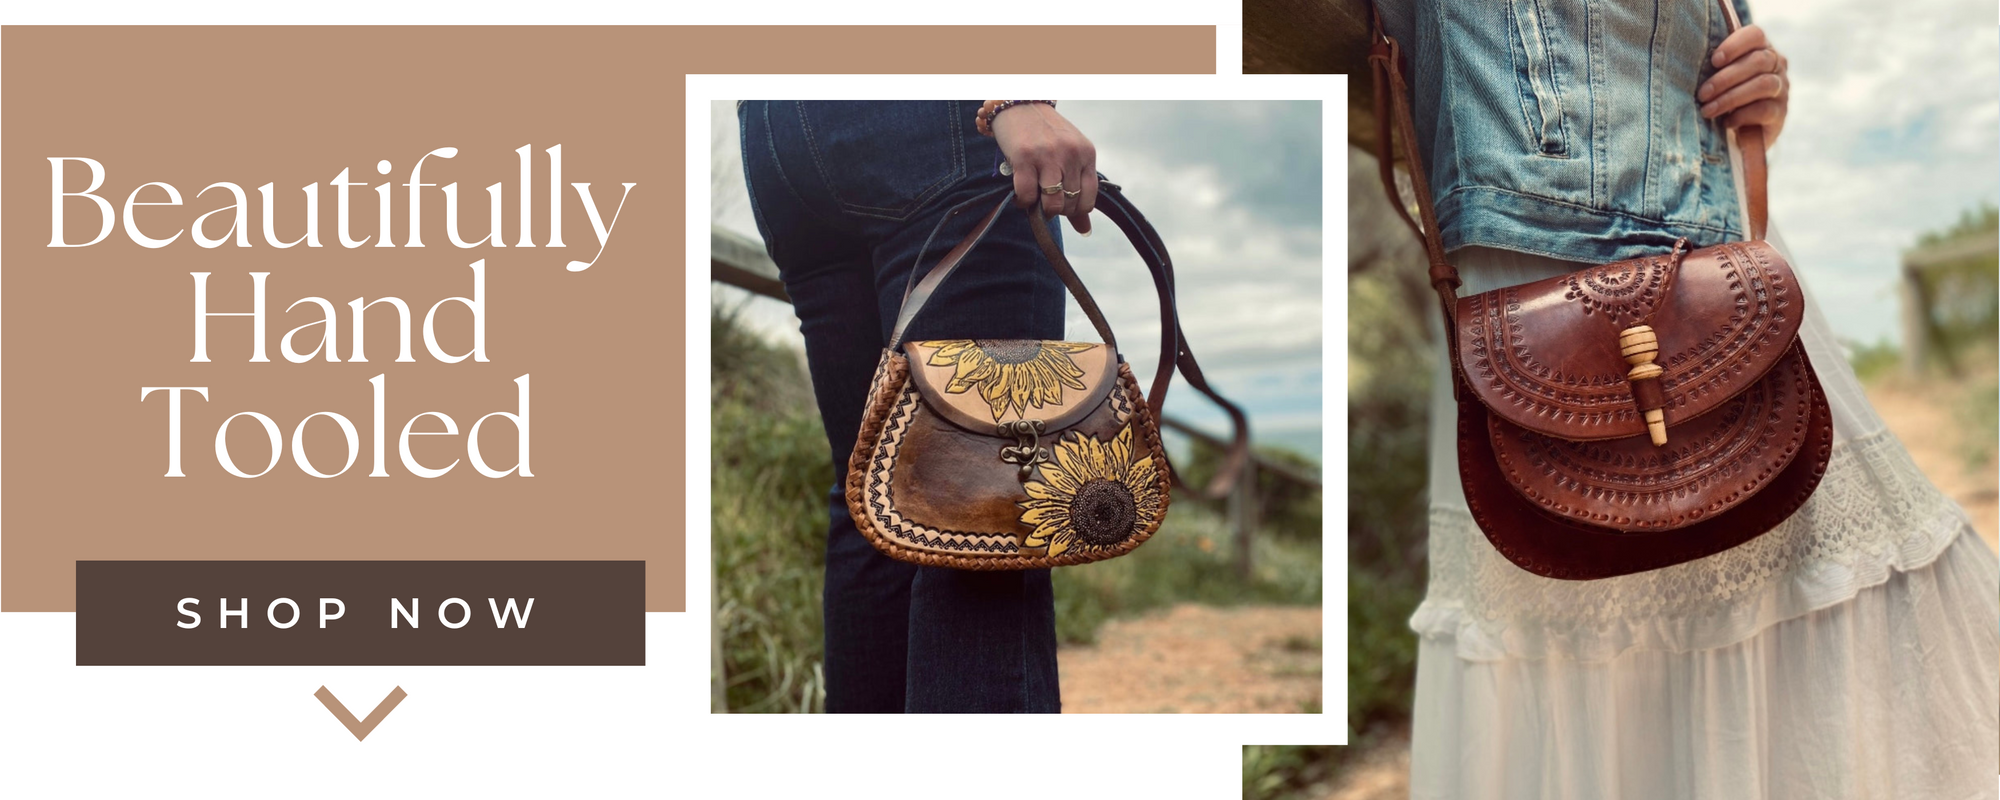 HANDMADE and hand tooled vintage style leather products from Mexico ...